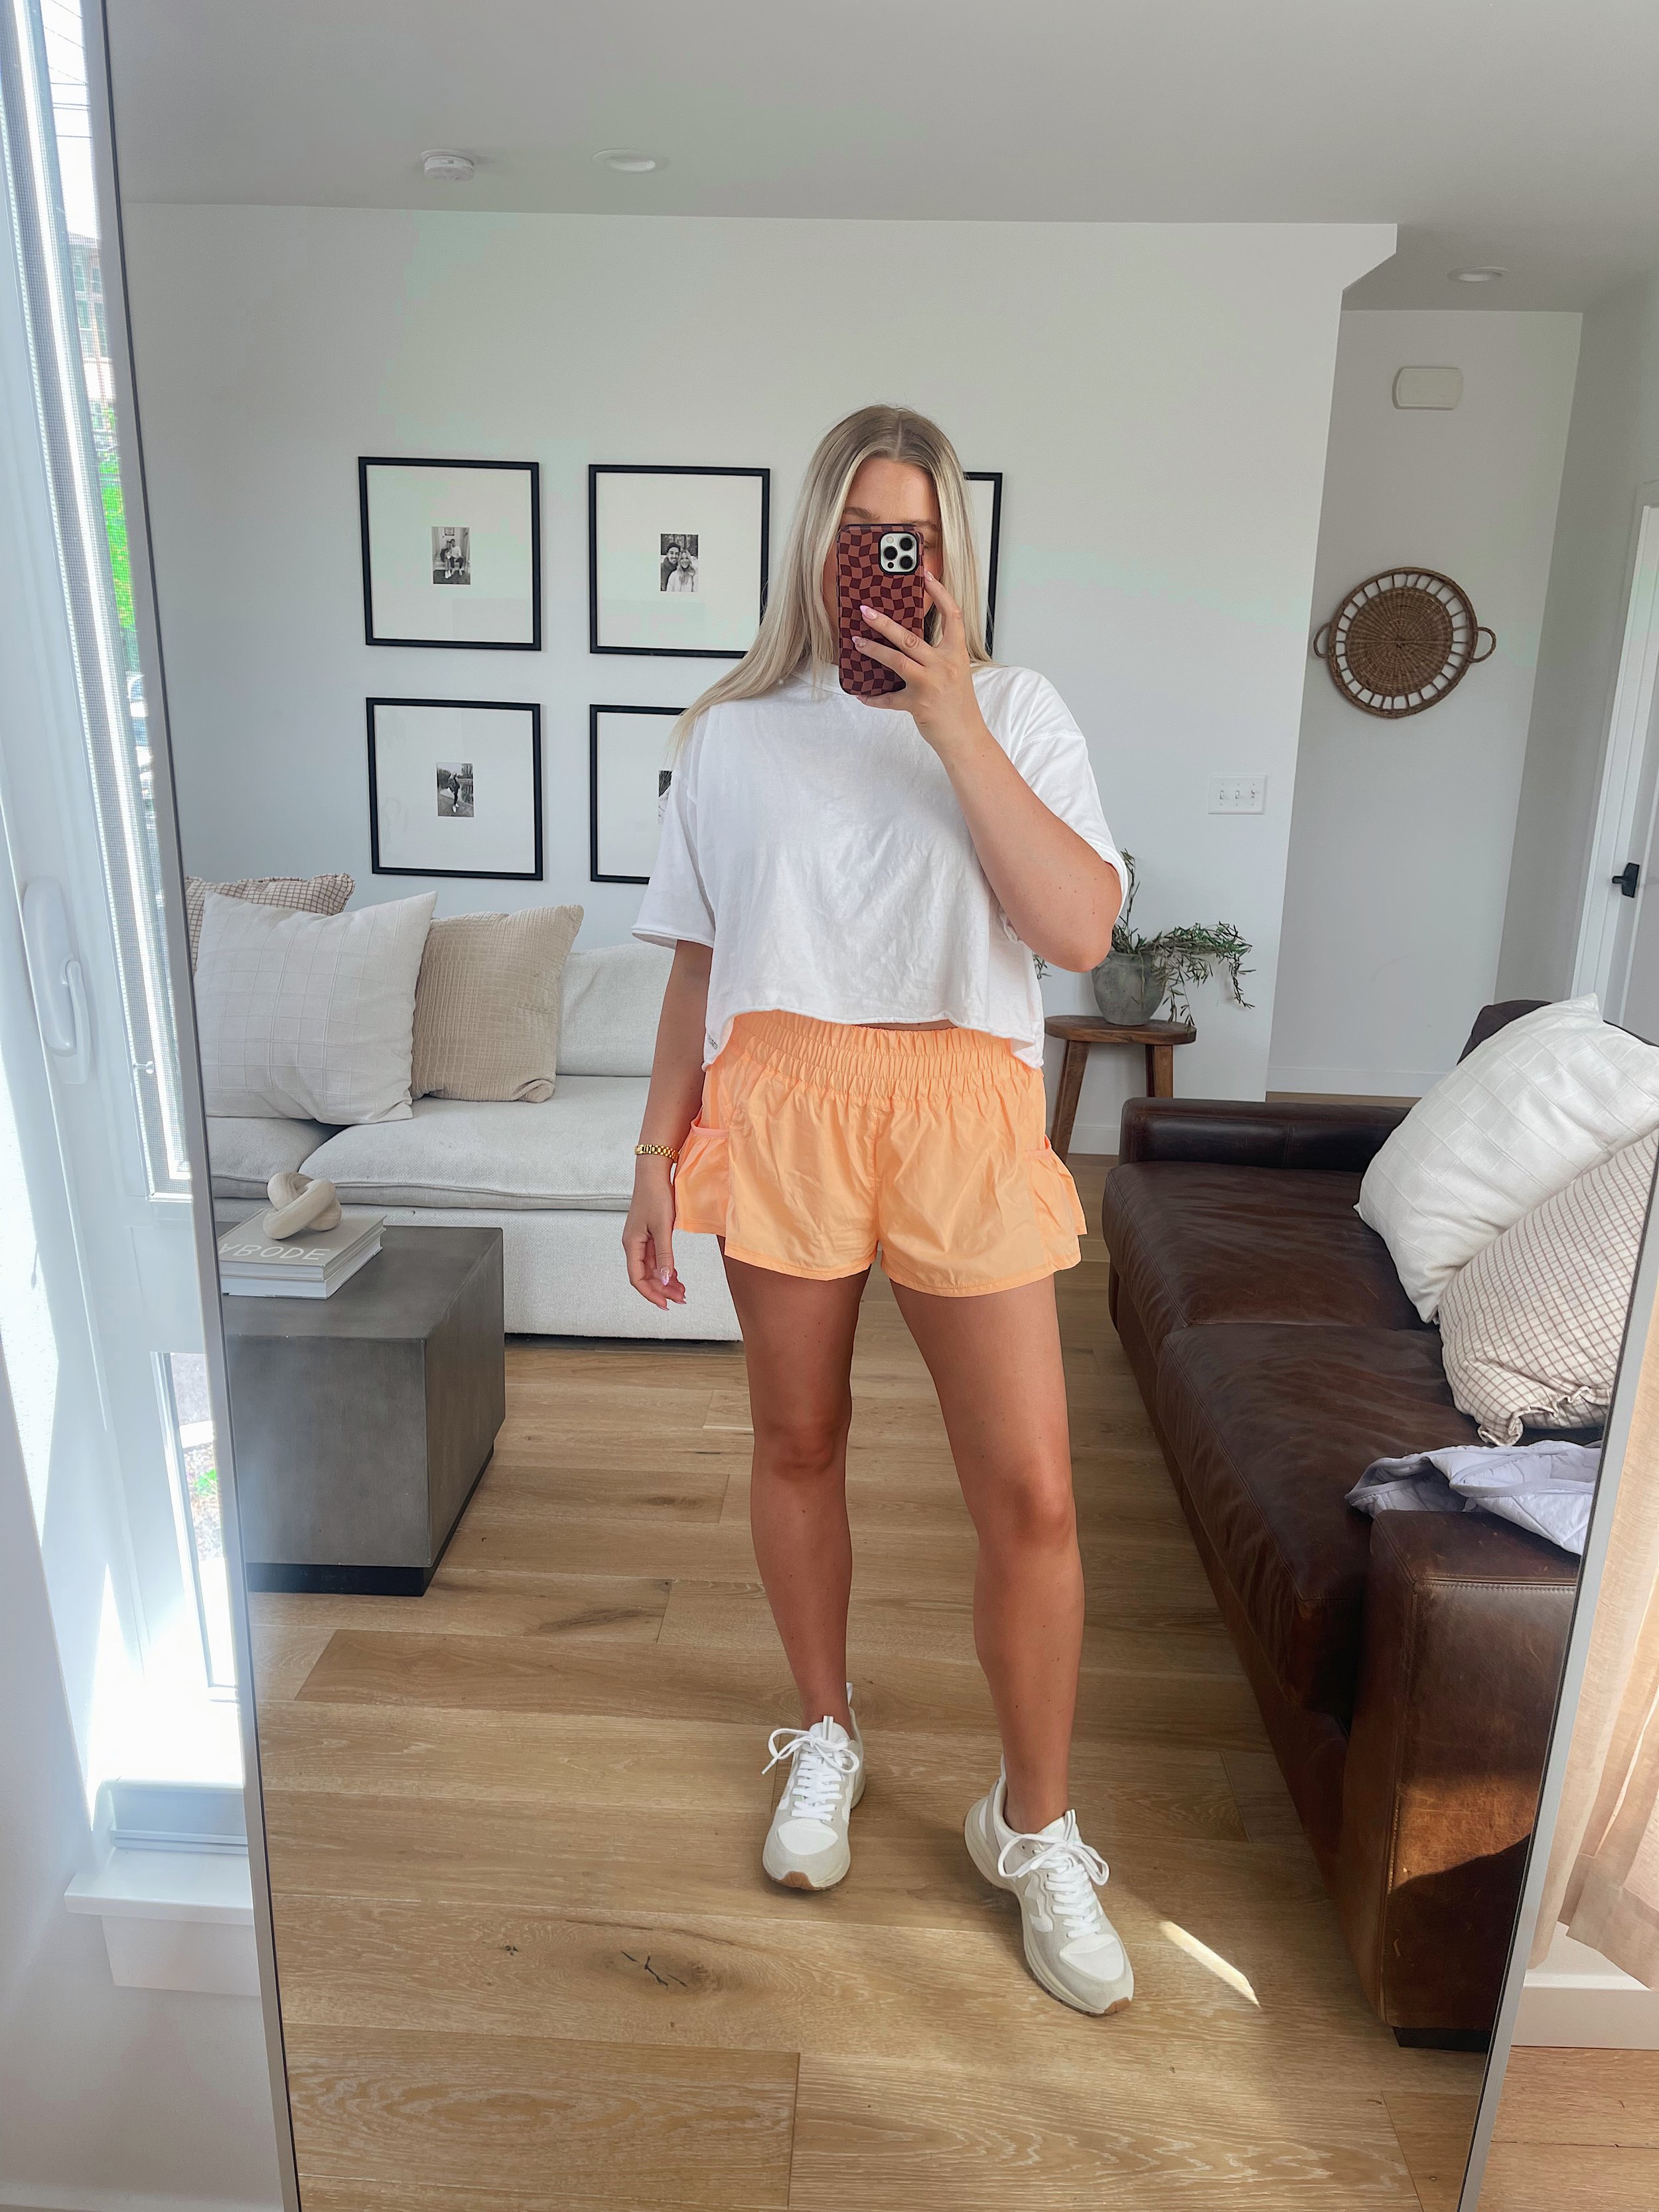 Comparing Two Styles Of Free People Movement Shorts - bresheppard.com.JPG